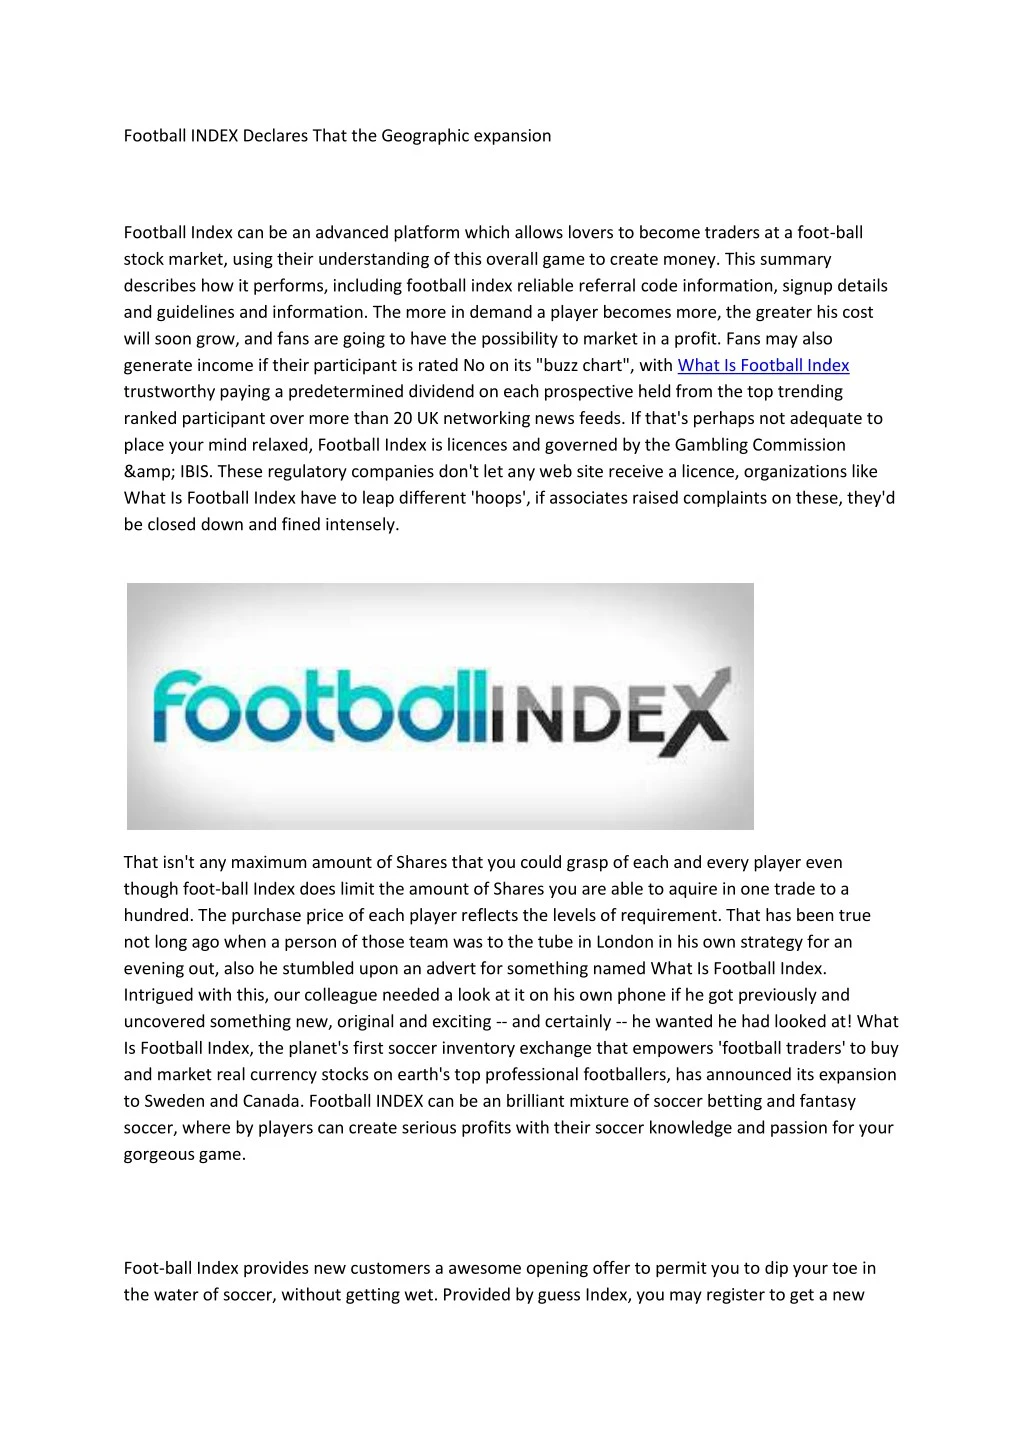 football index declares that the geographic